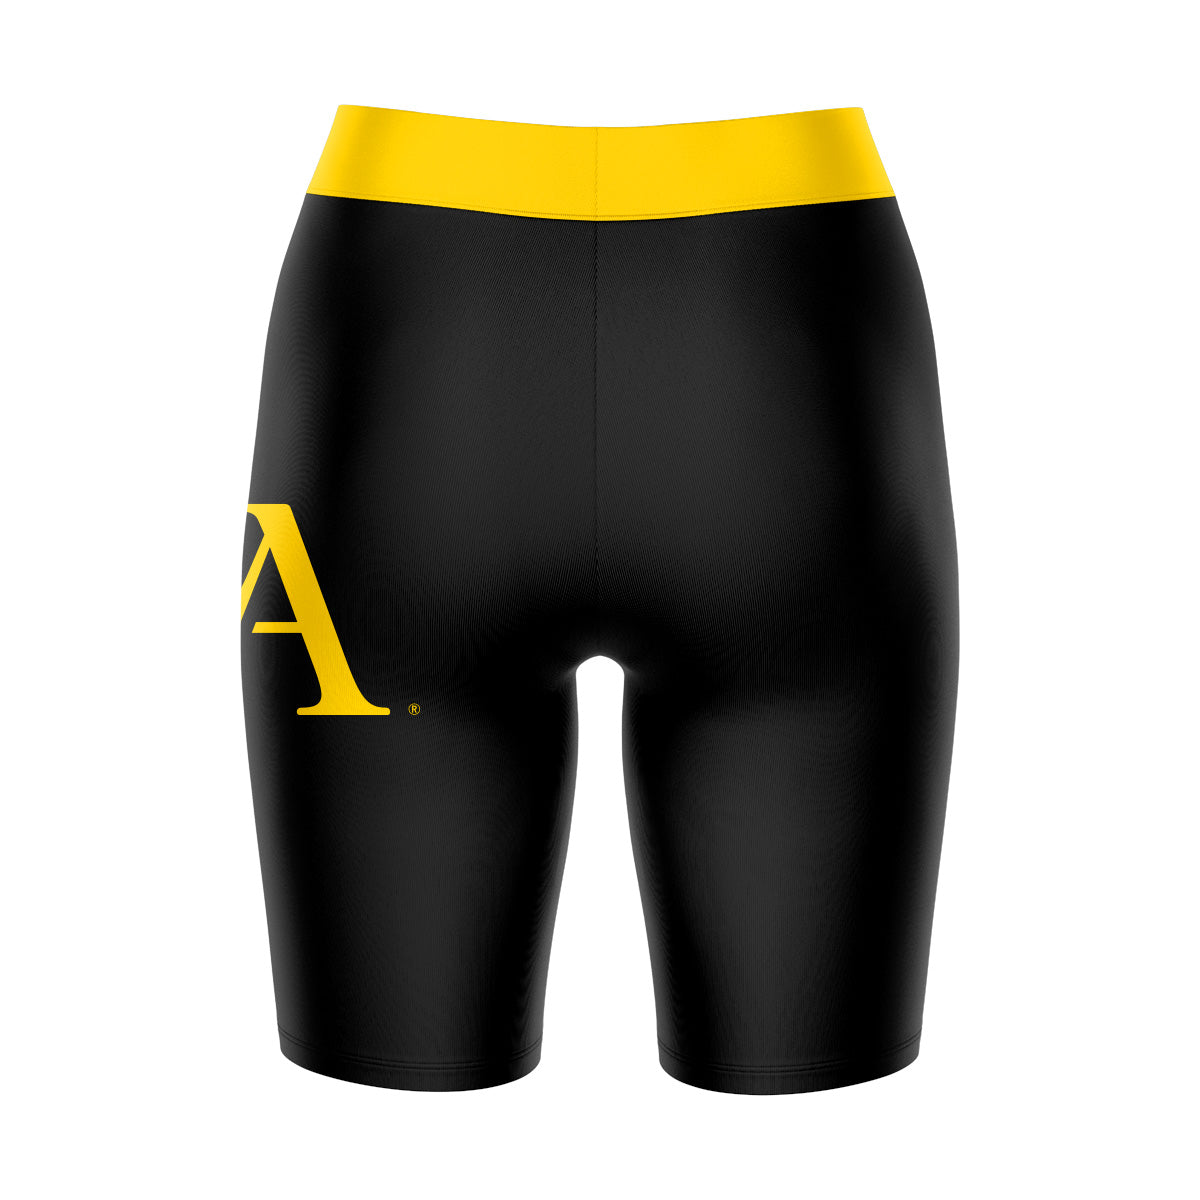 Cal State LA Golden Eagles Vive La Fete Game Day Logo on Thigh and Waistband Black and Gold Women Bike Short 9 Inseam"